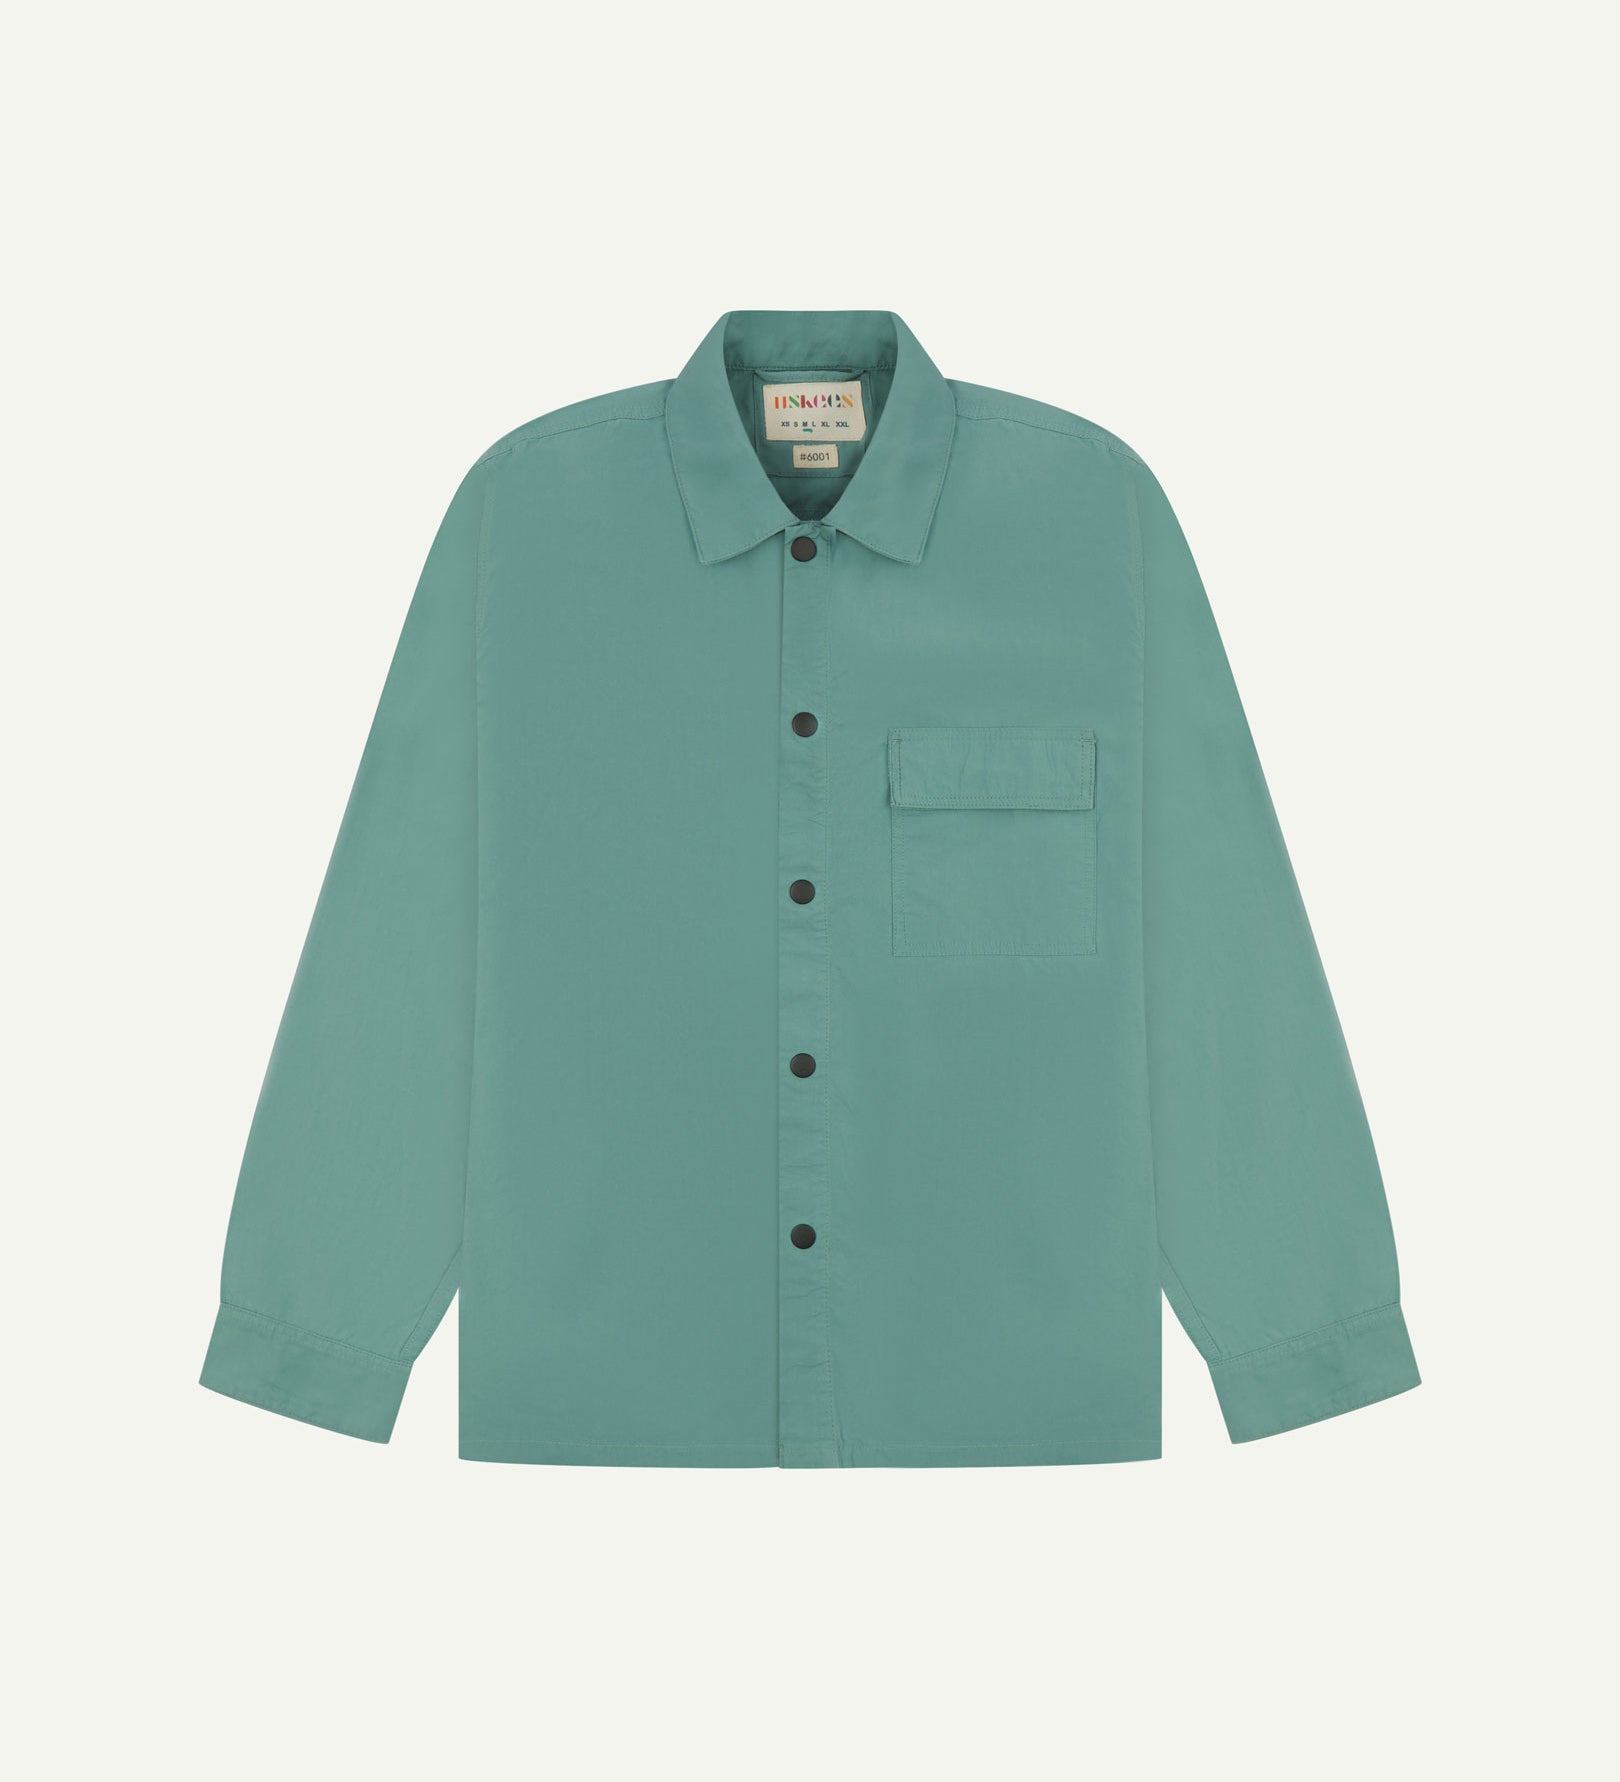 Front flat view of blue-green eucalyptus, lightweight overshirt. Clear view of the press studs, breast pocket and Uskees branding label.